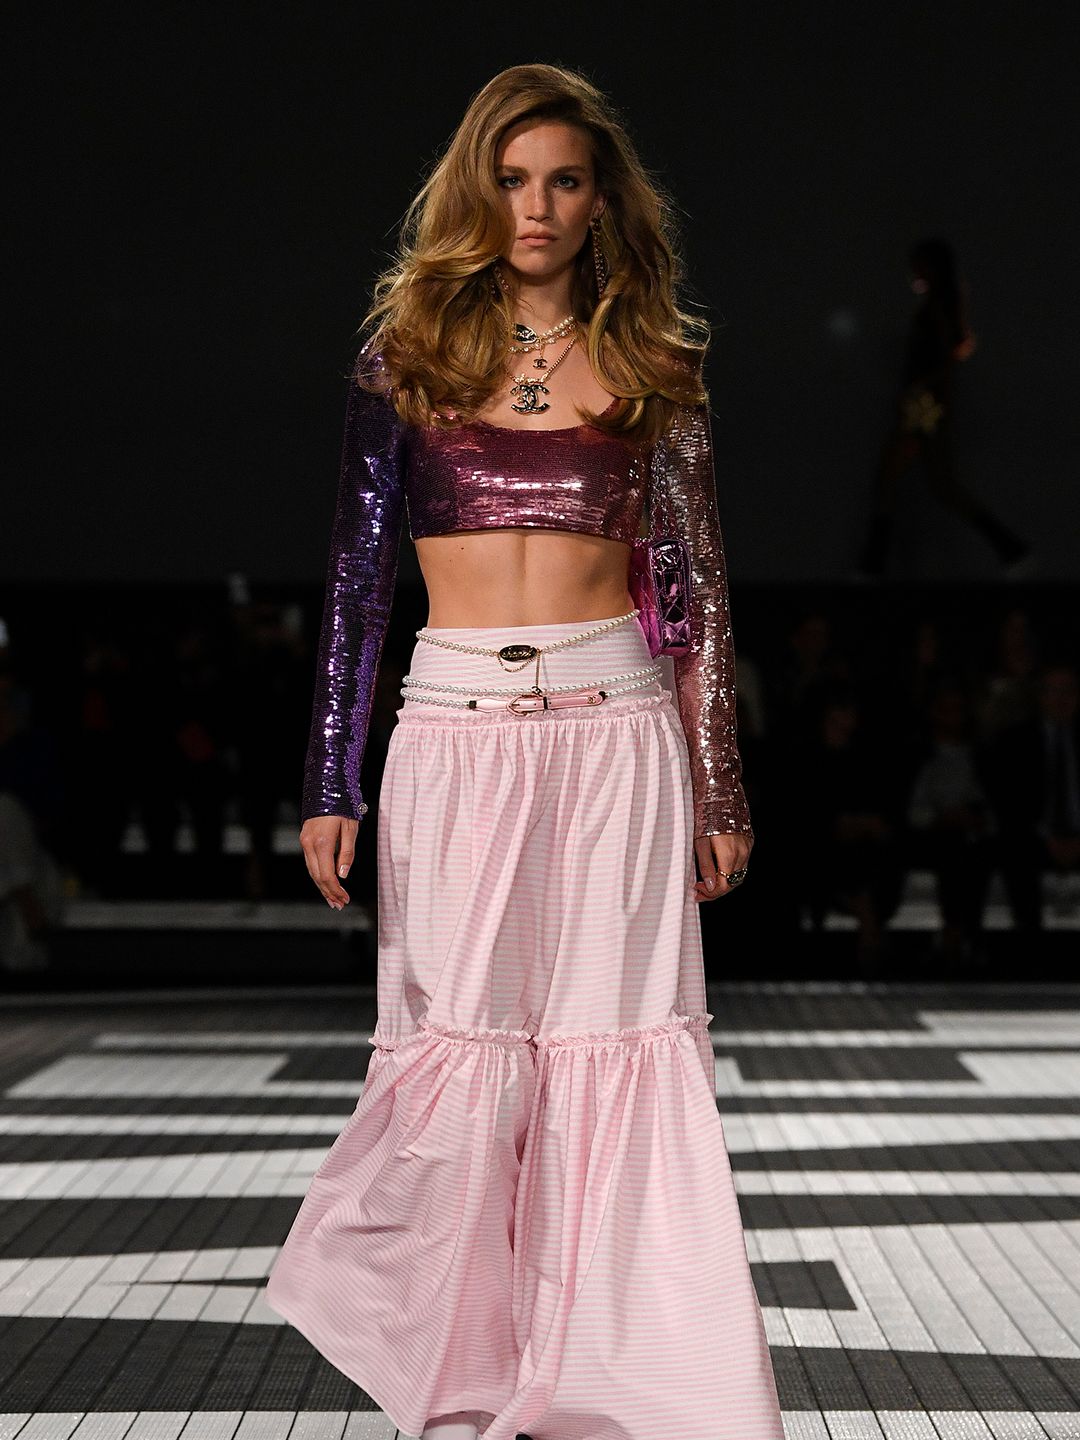 A model sports a Cindy Crawford-level blow dry with a shiny ombré crop top 